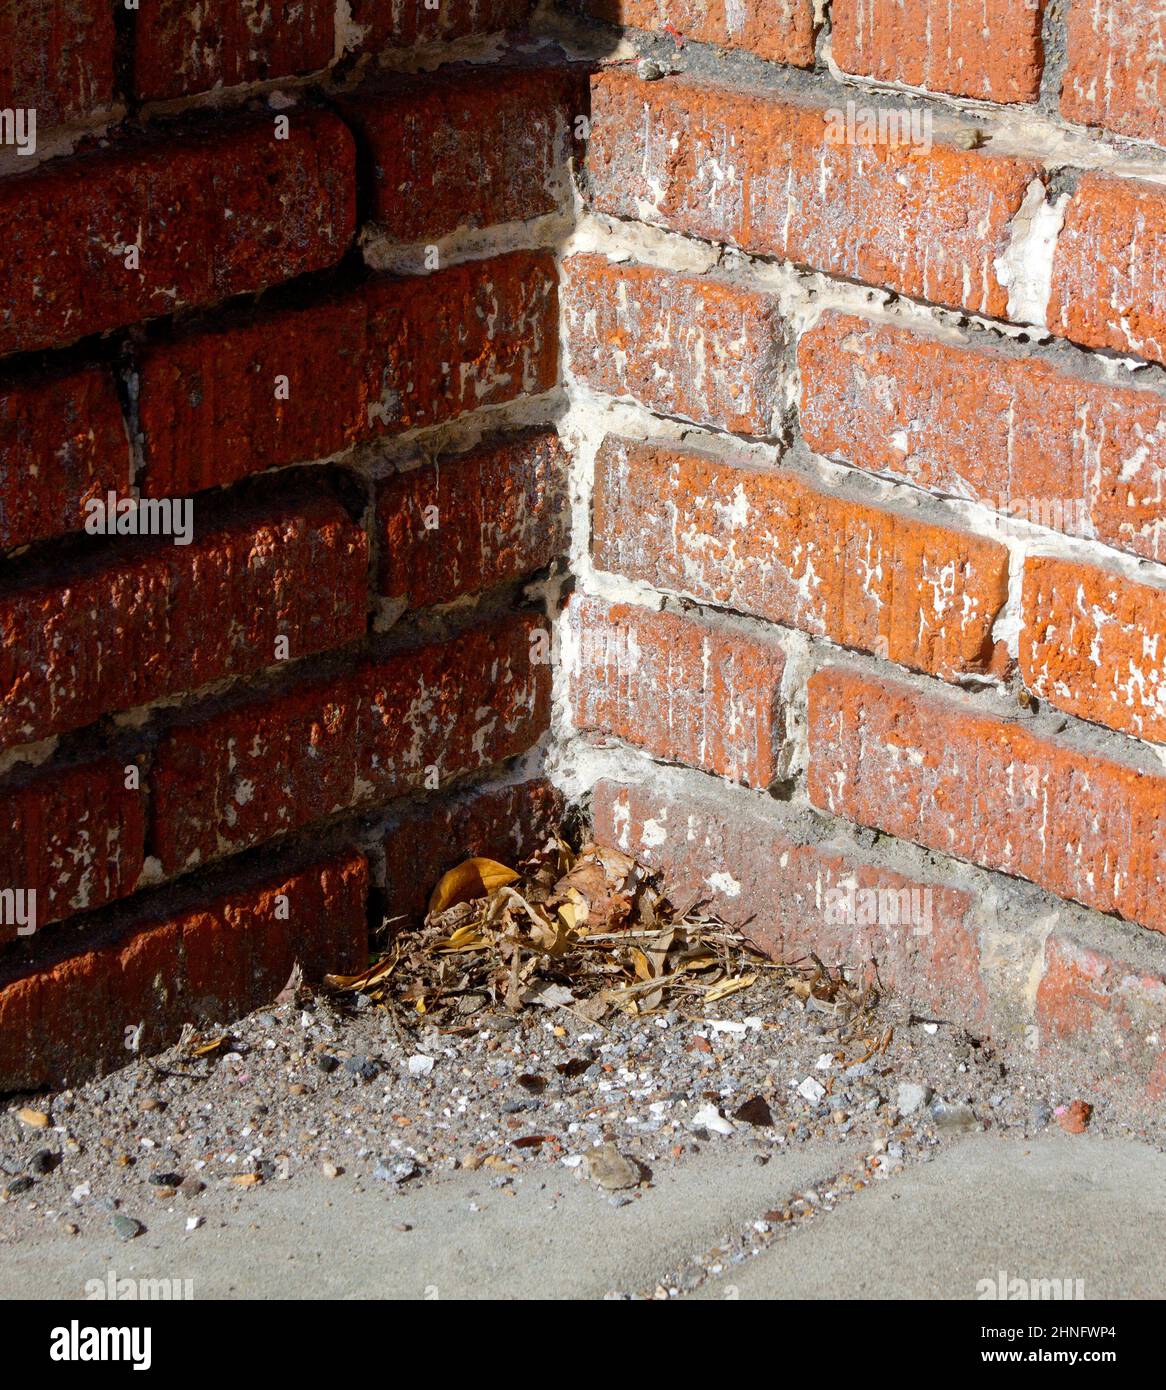 Conceptual image of a bricked in corner with debris, evocative of a 'Dead End' or 'Hitting a Brick Wall' or 'Being Cornered' or having 'No Way Out' 'F Stock Photo